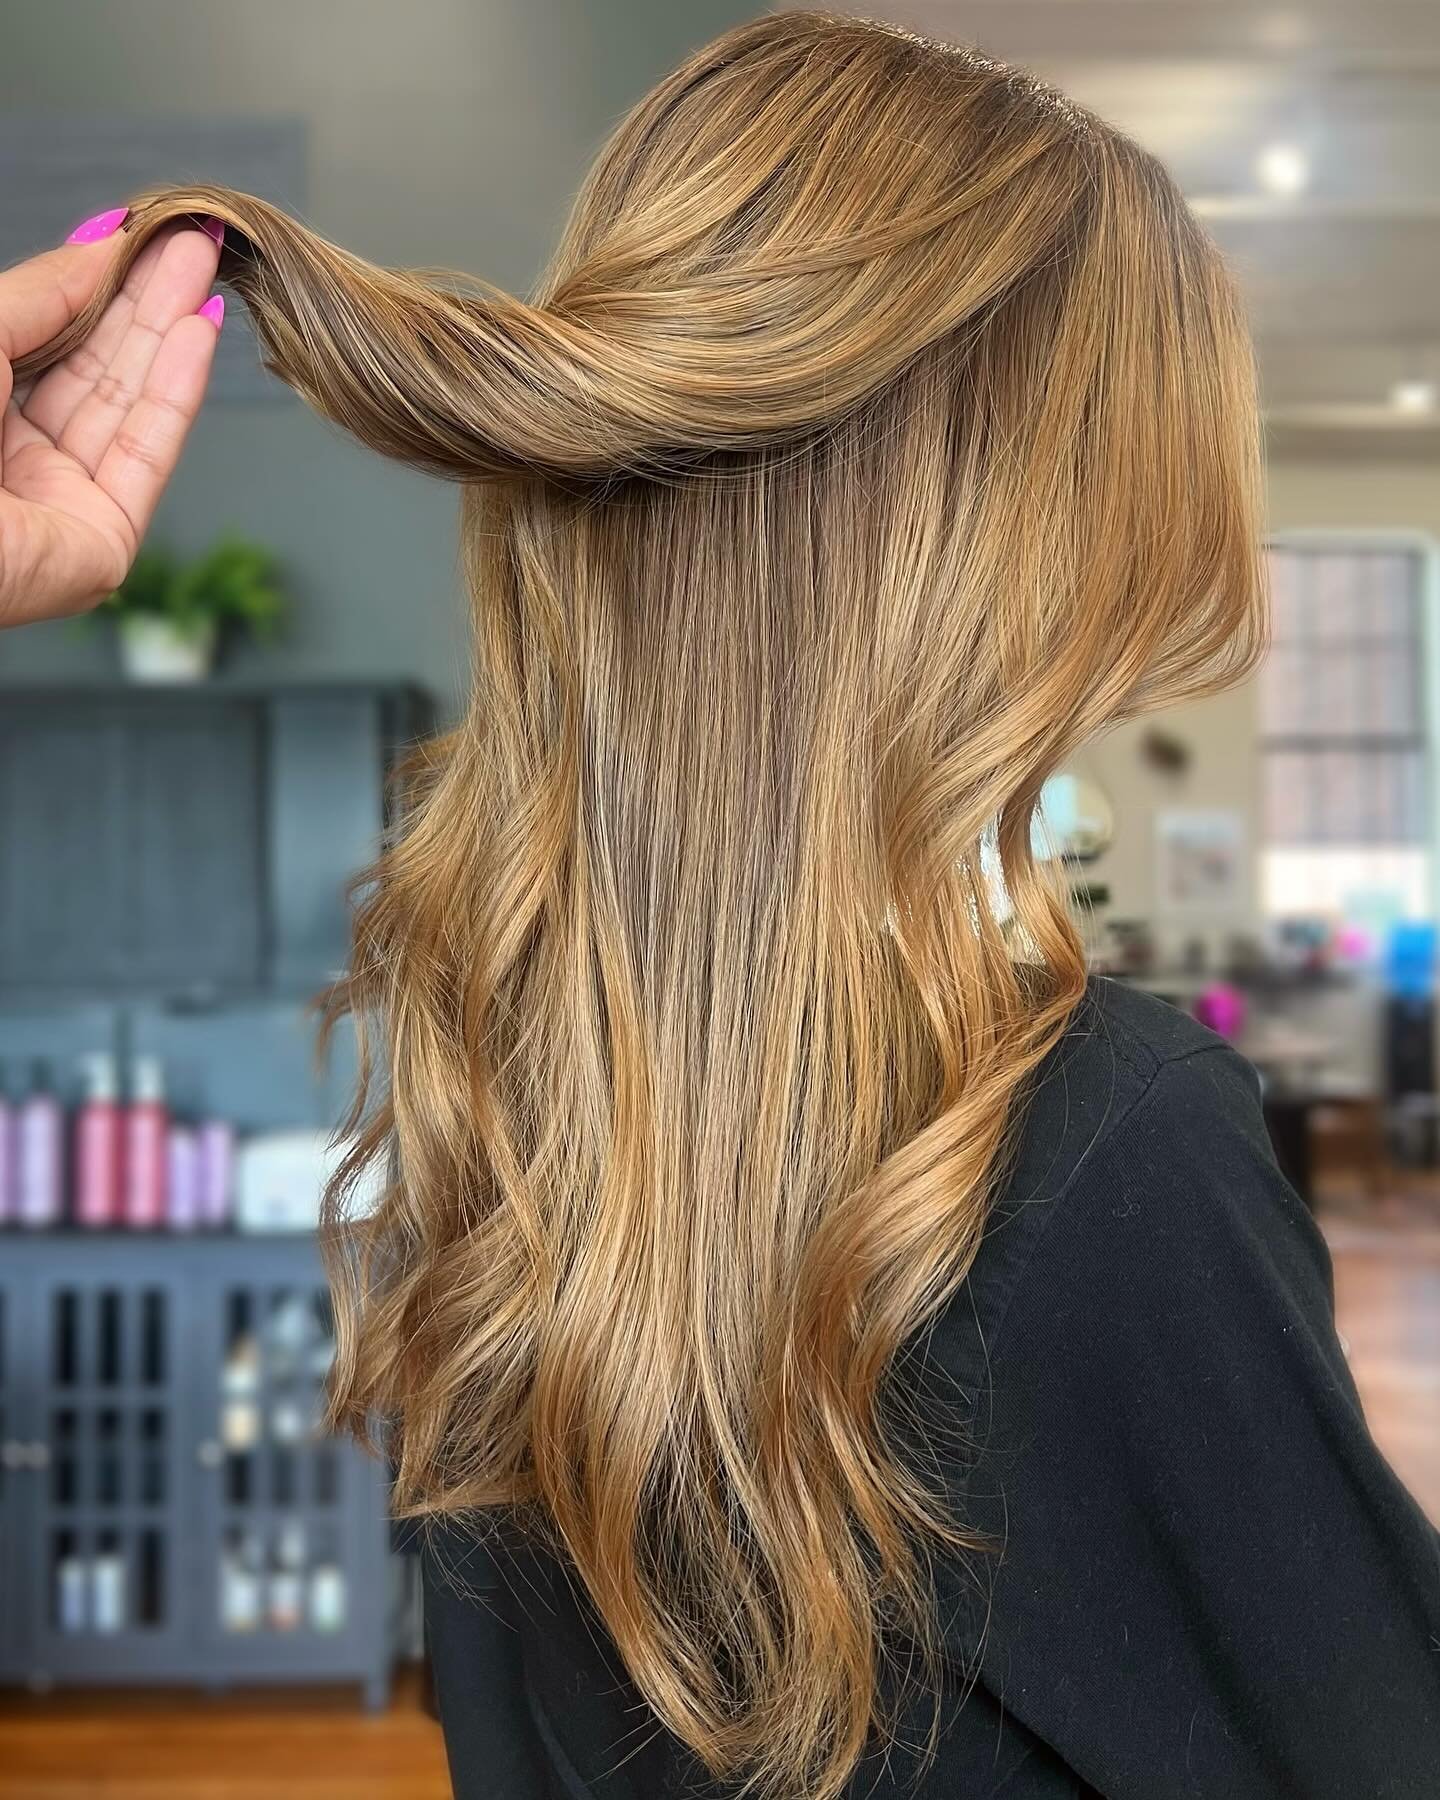 Blended honey for this sweetie! 🍯 Book your next color with us! (706)-543-3656 / www.modelcitizensaloncompany.com 🐝

Look created by Damaris @dr.hairandbeauty for @modelcitizensalon washed with @pureology Pure Volume System &amp; styled using @redk